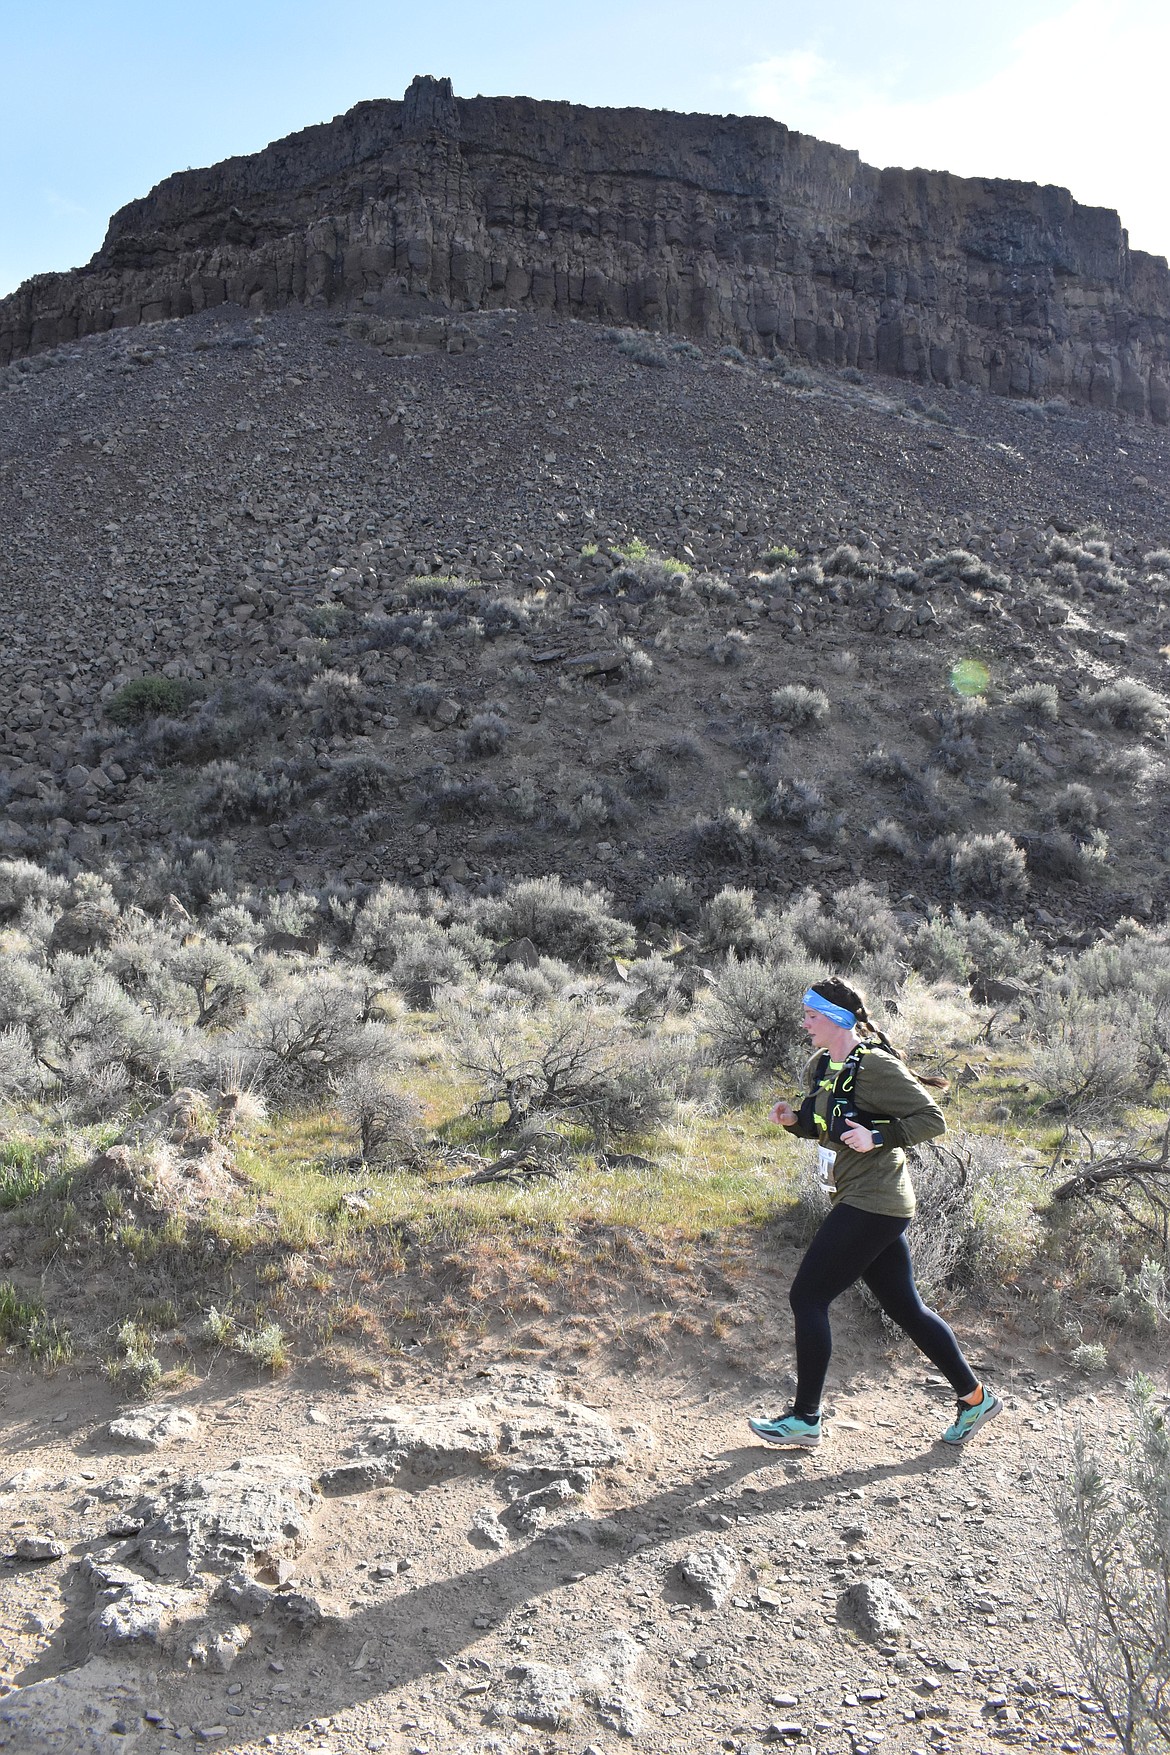 Rebecca Pettingill/Columbia Basin Herald
Runners of the Ancient Lakes Trail Run had to watch for rocks and roots along the trail so as not to trip. The basalt cliffs of the Columbia River Gorge created a postcard background for the racers.